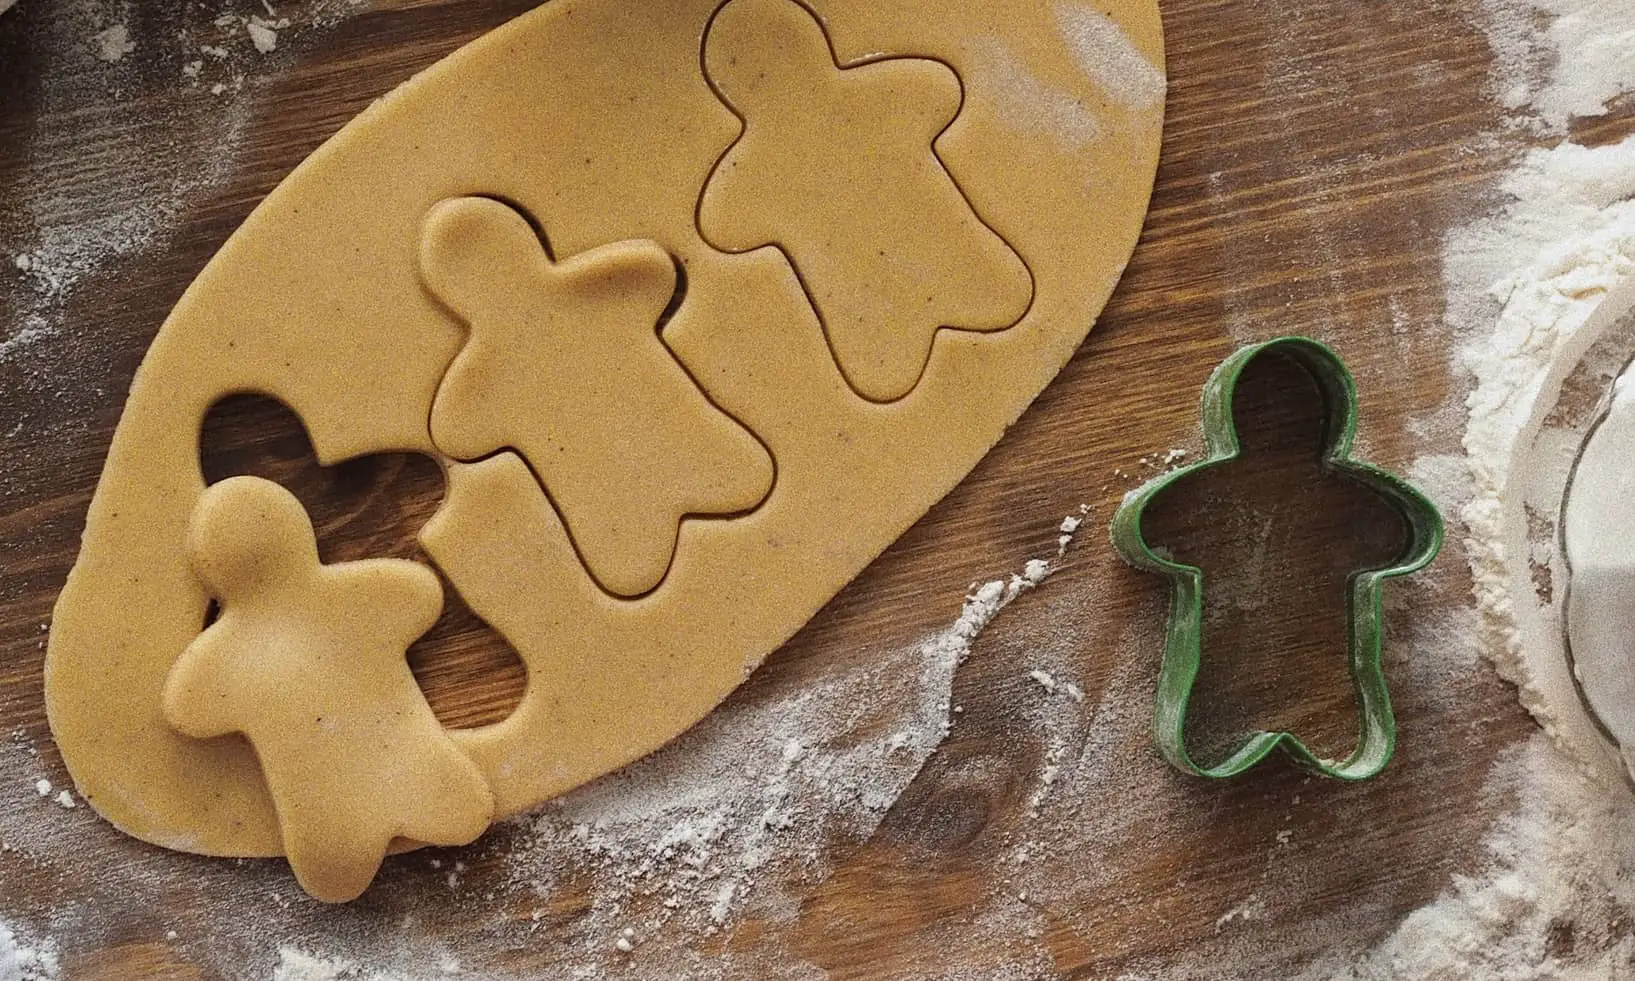 Gingerbread man being cut out of pastry